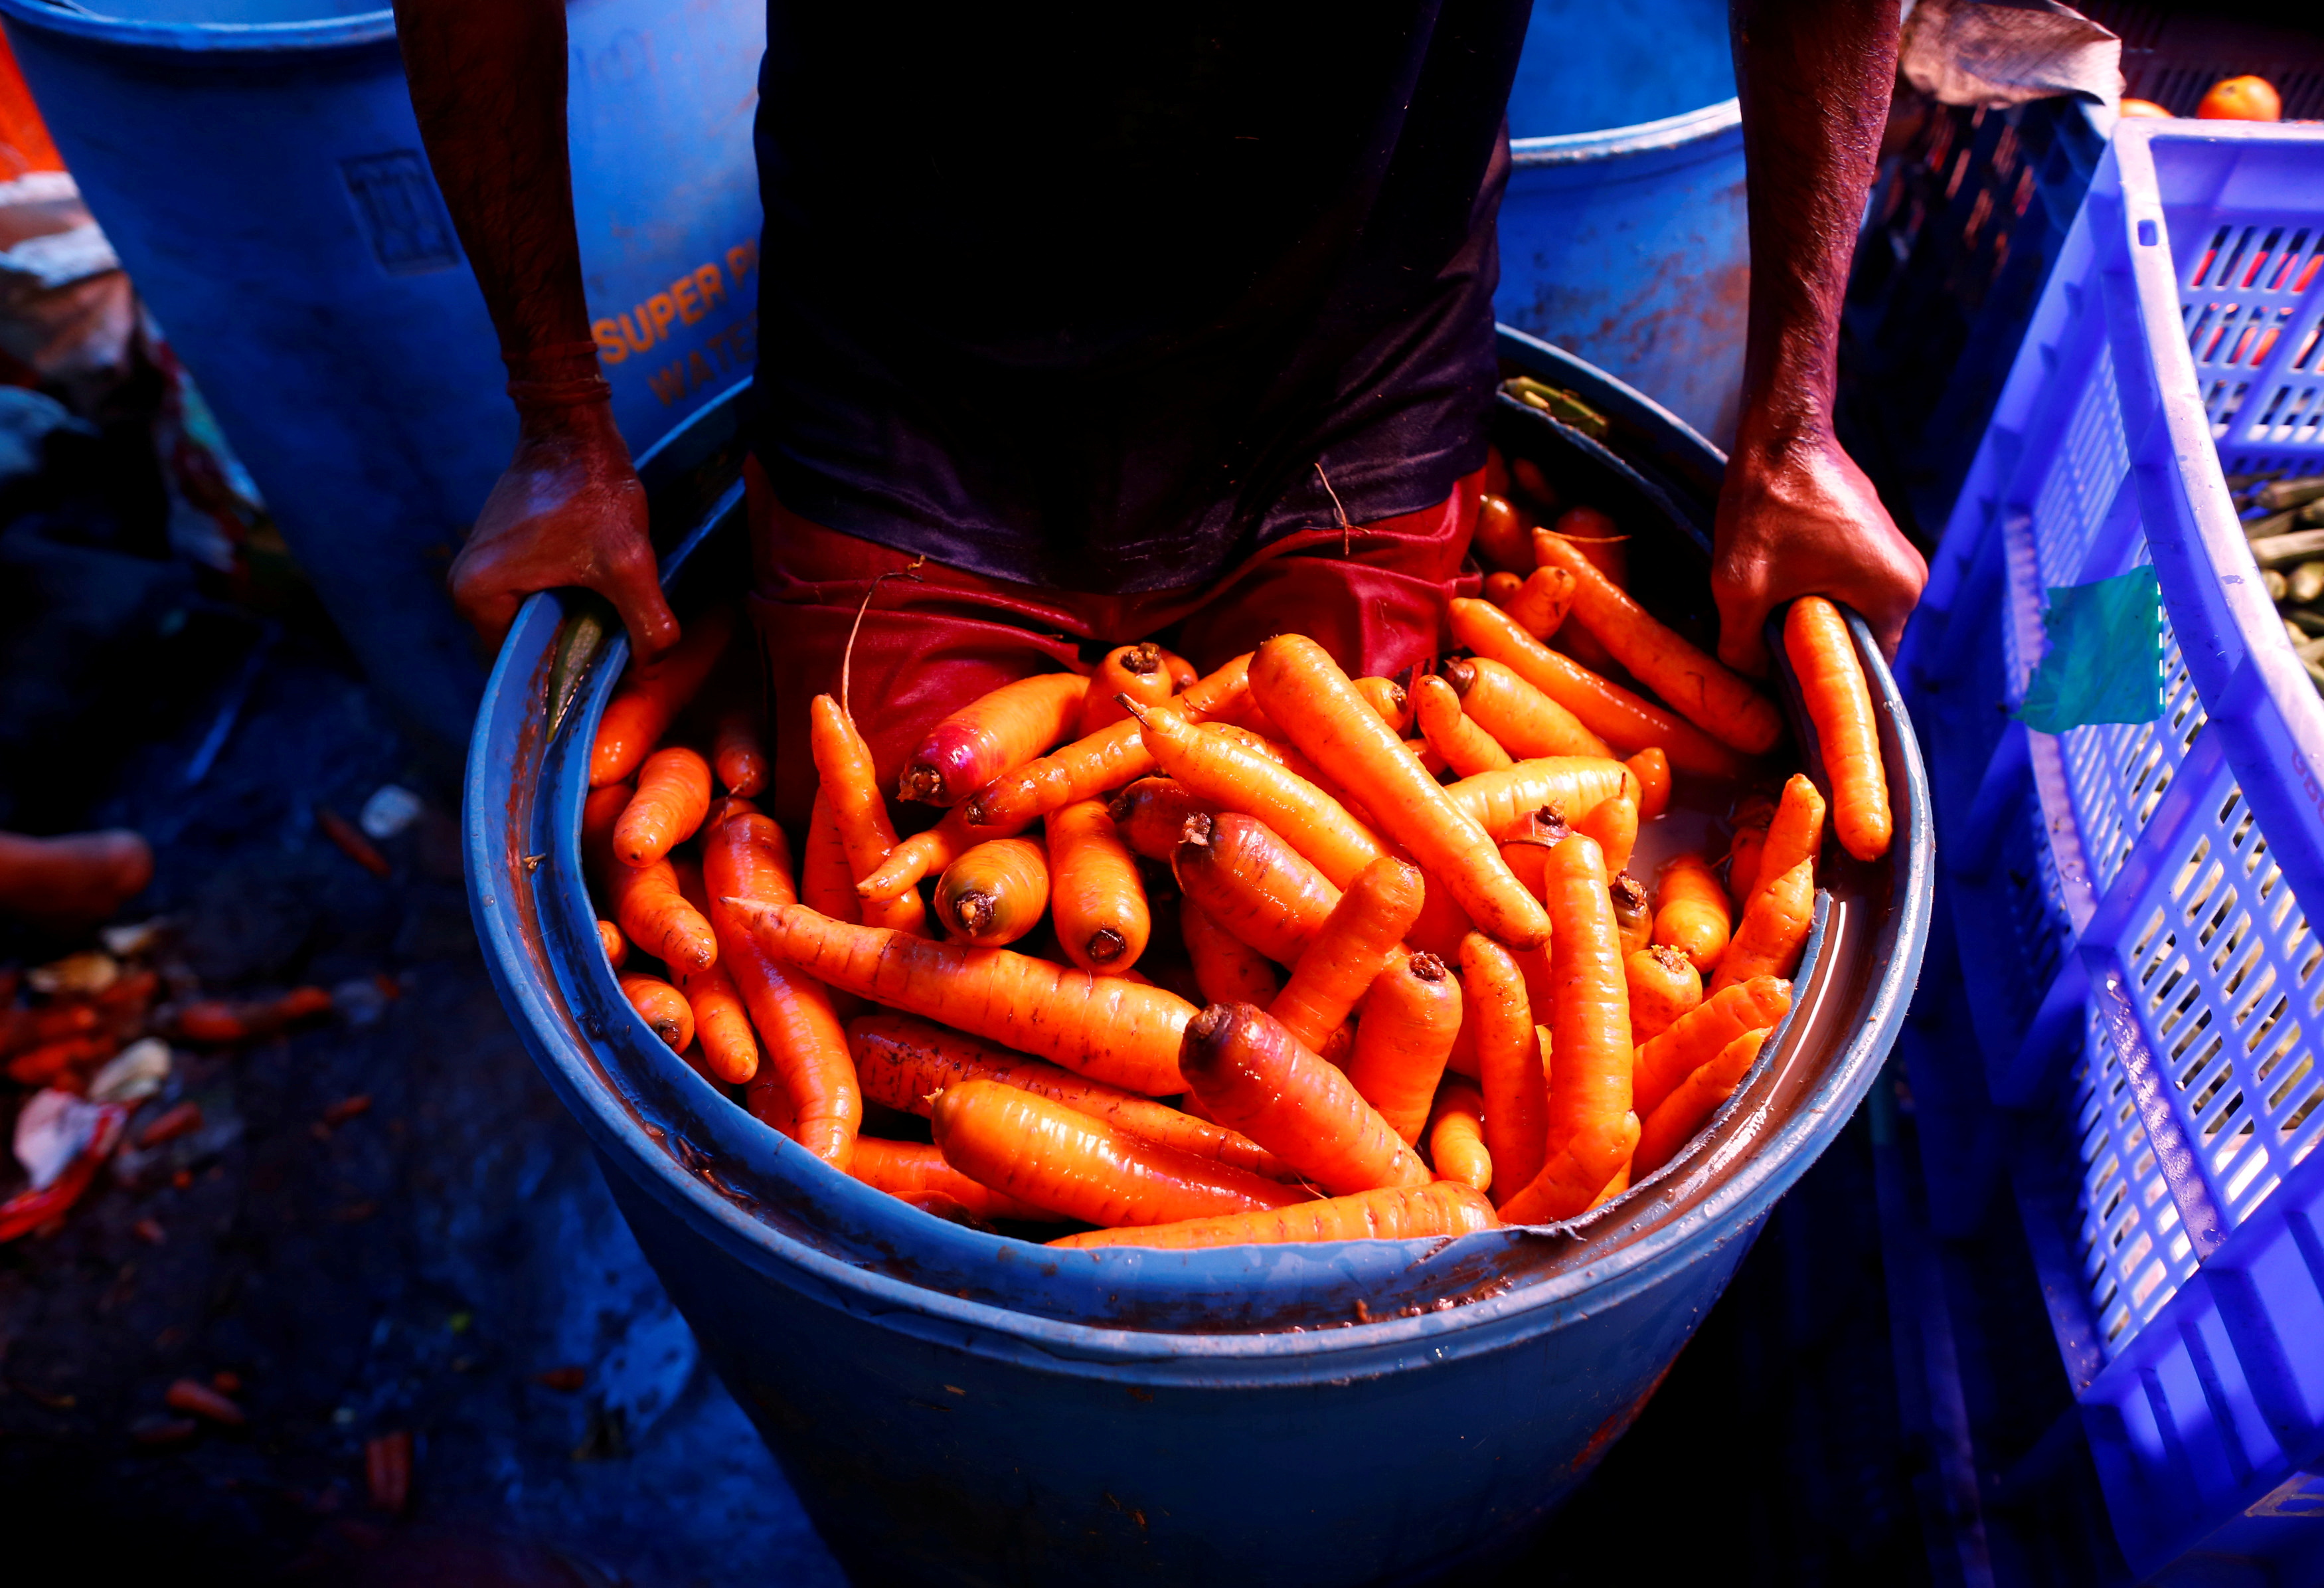 A worker washes carrots in a plastic drum at a wholesale vegetable market in Mumbai